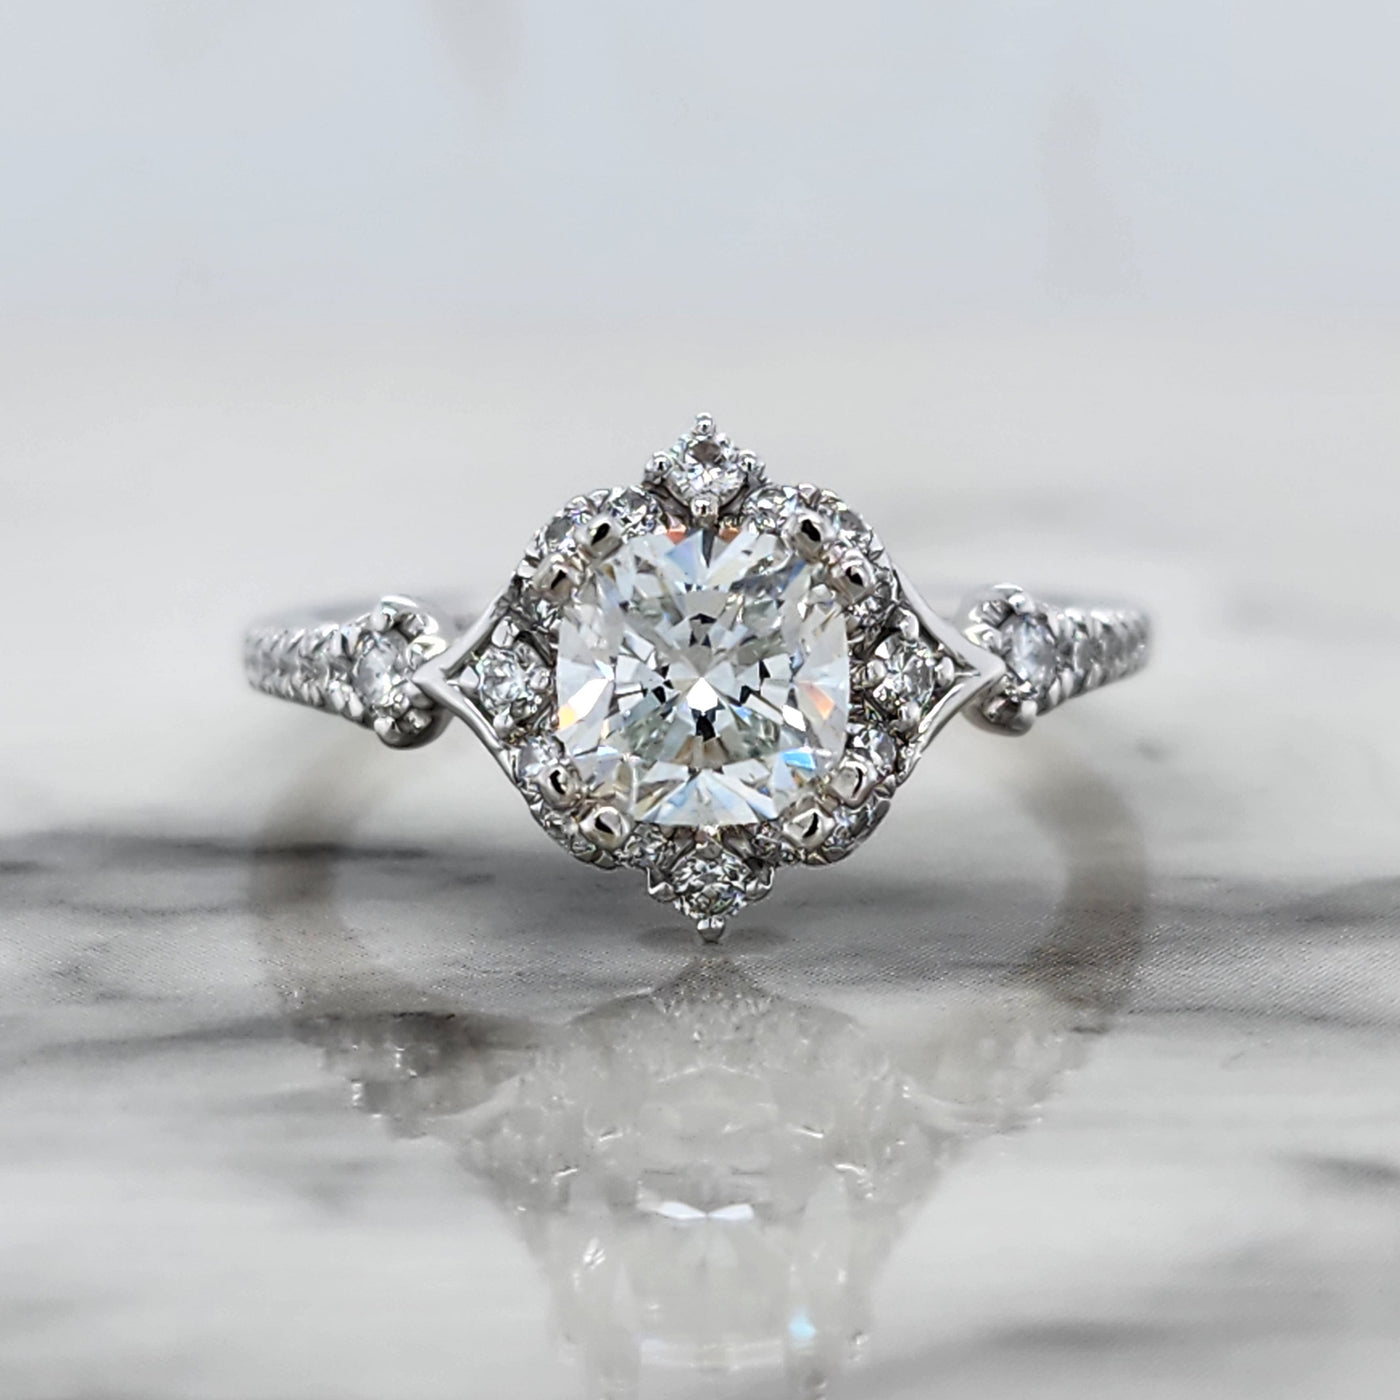 White Gold Cushion Cut Engagement Ring With Halo and Accent Diamonds